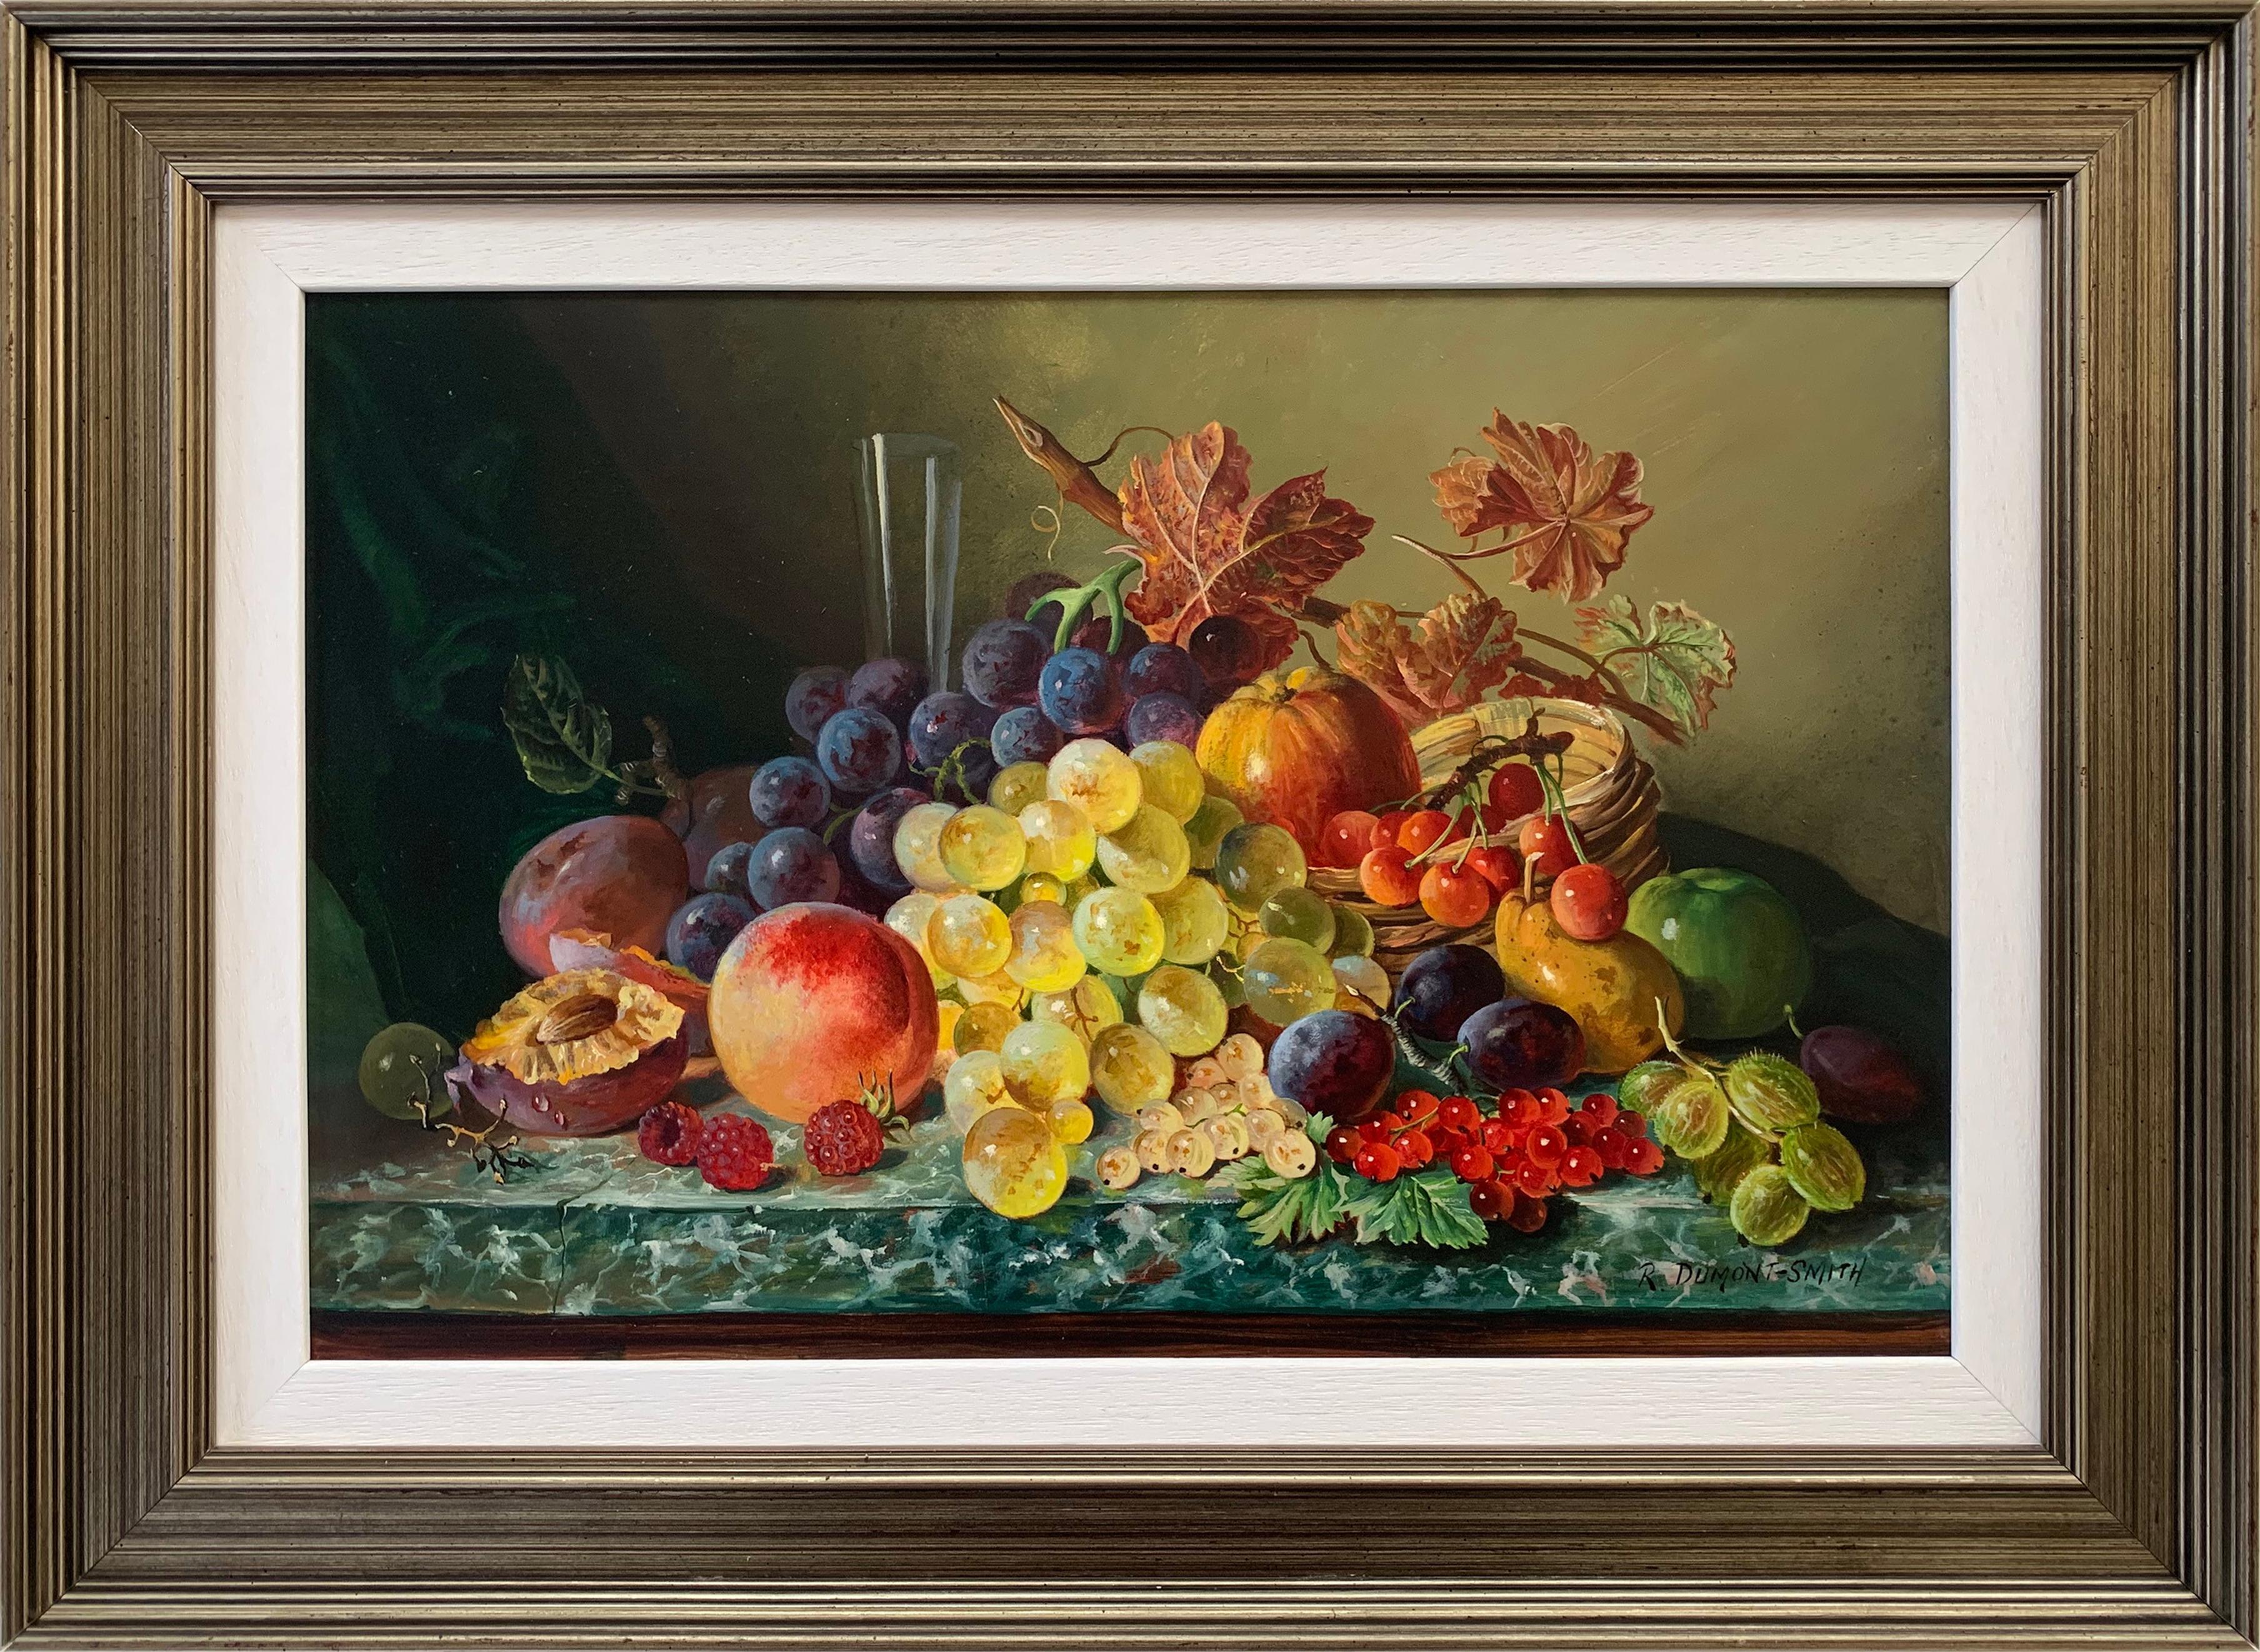 Robert Dumont-Smith Interior Painting - Beautiful Colourful Still Life Oil Painting of Fruit by Famous British Painter